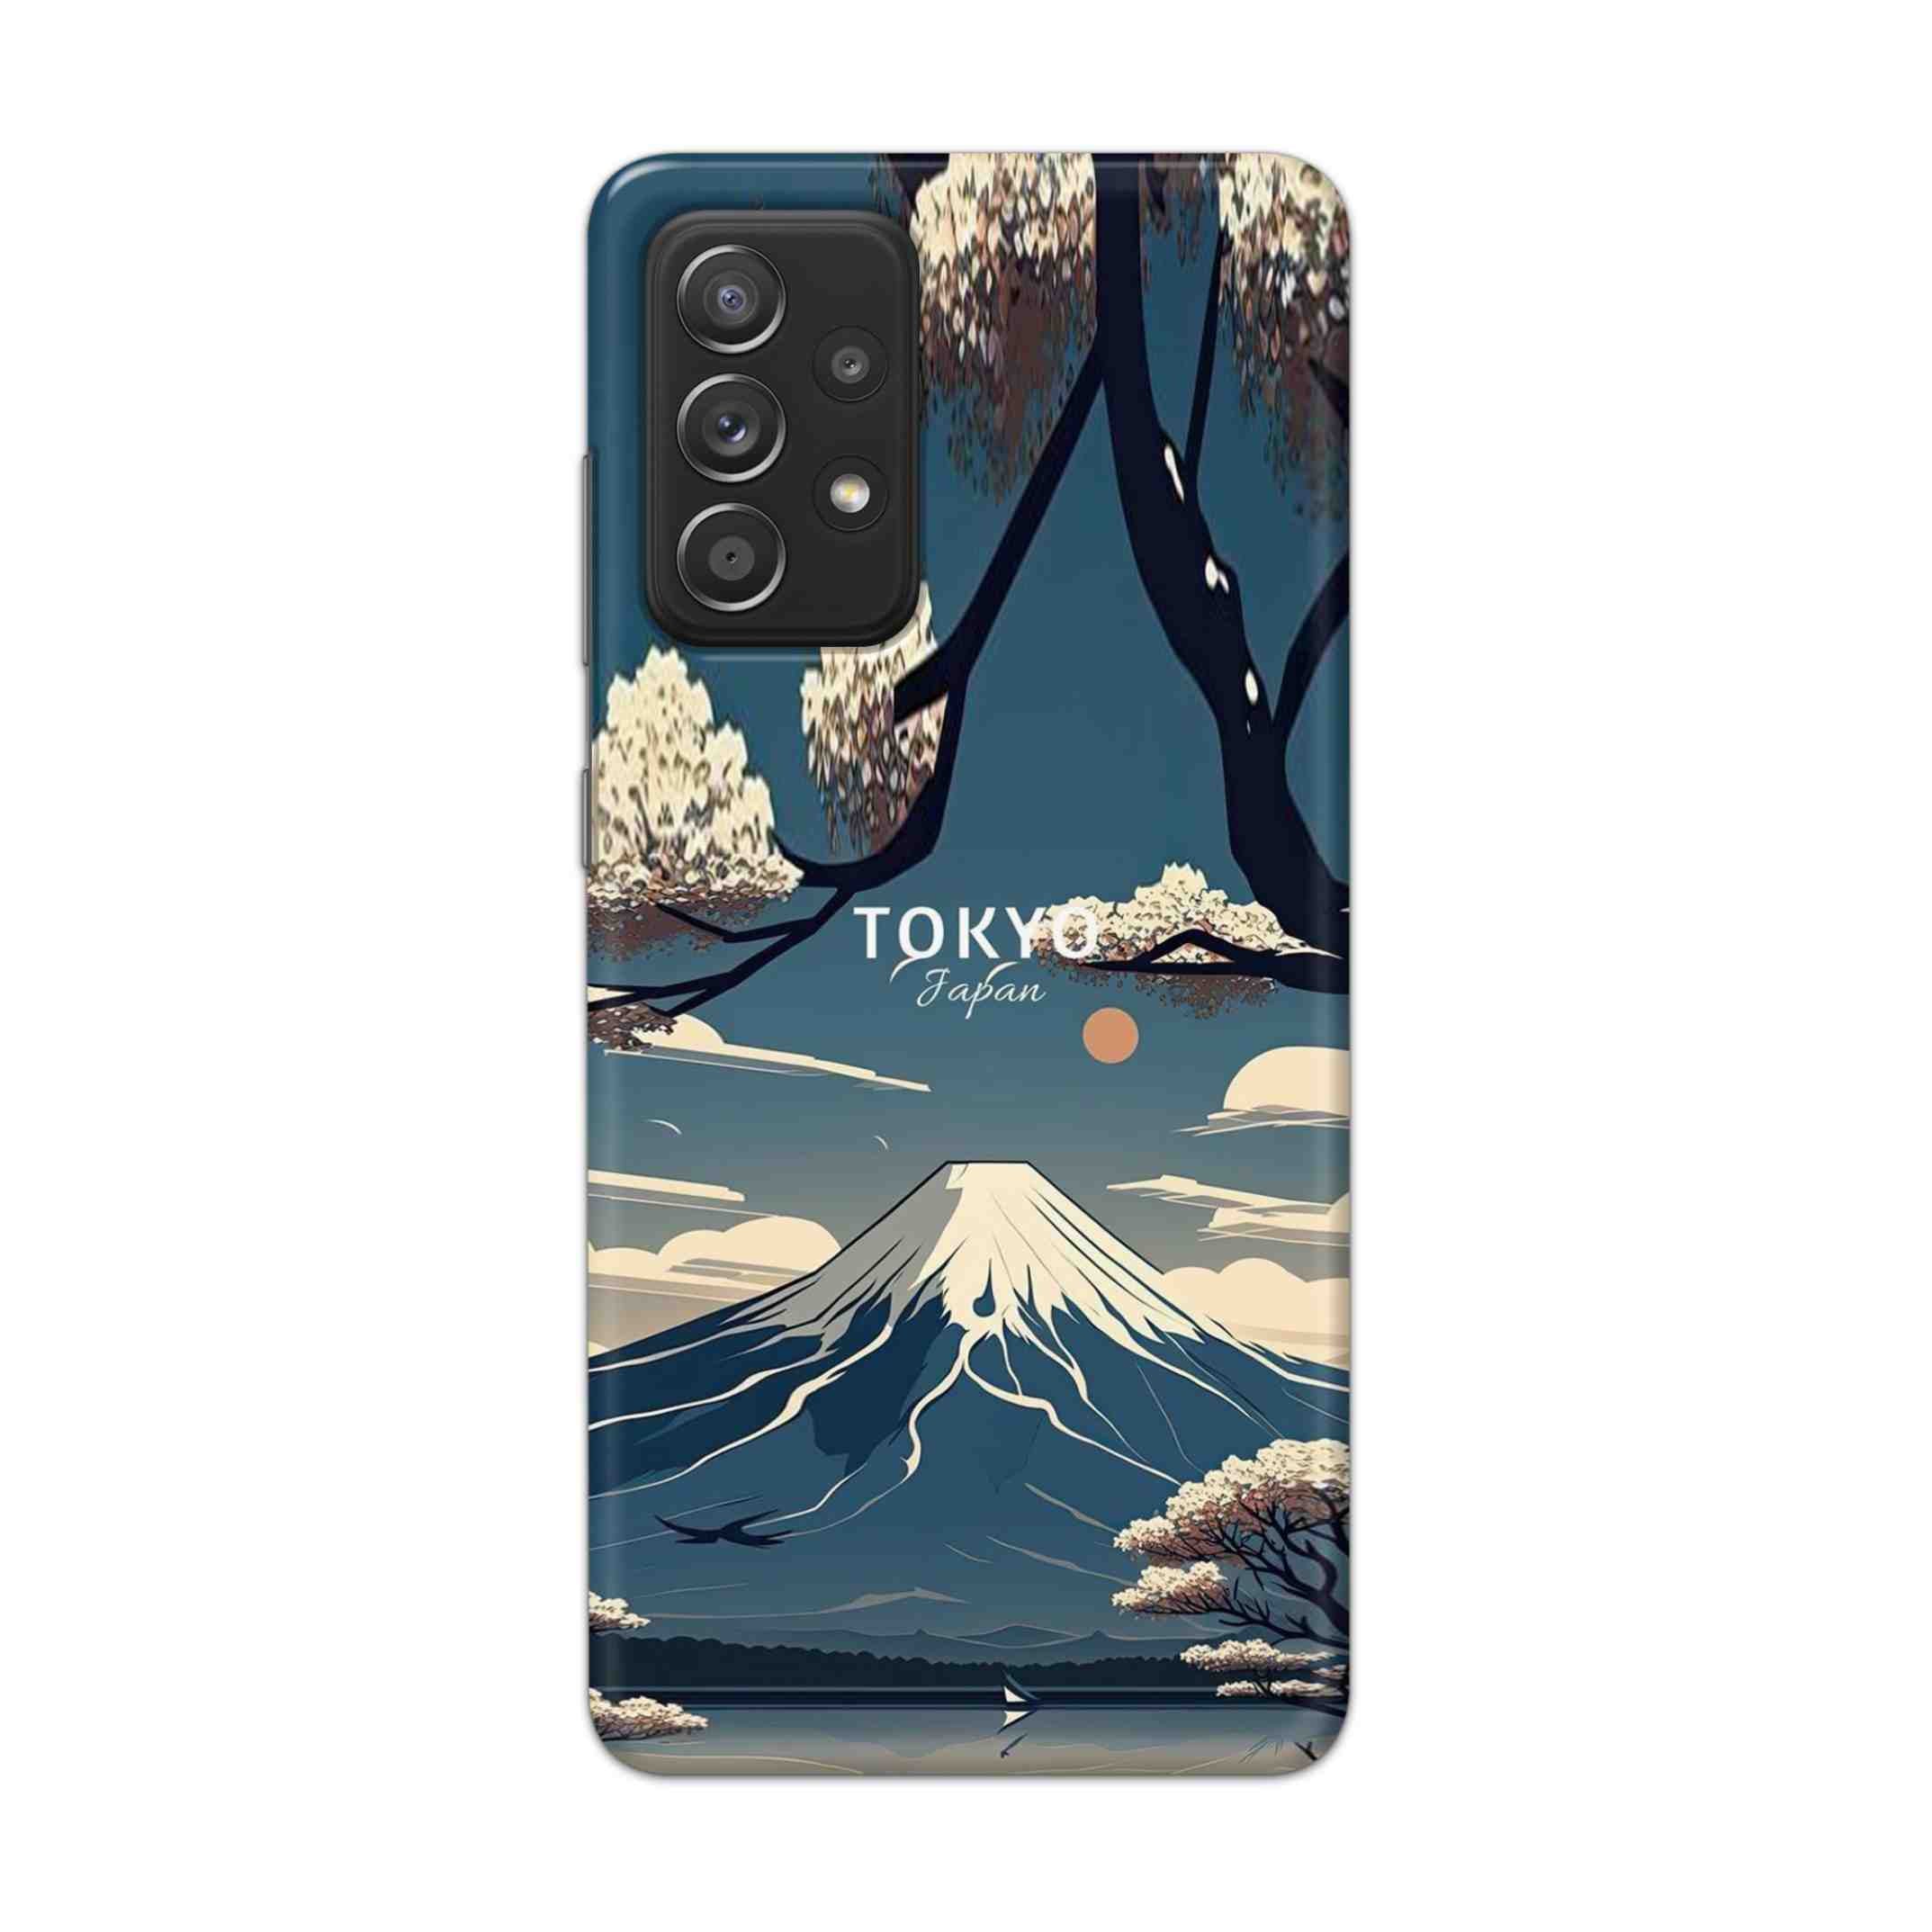 Buy Tokyo Hard Back Mobile Phone Case Cover For Samsung Galaxy A52 Online